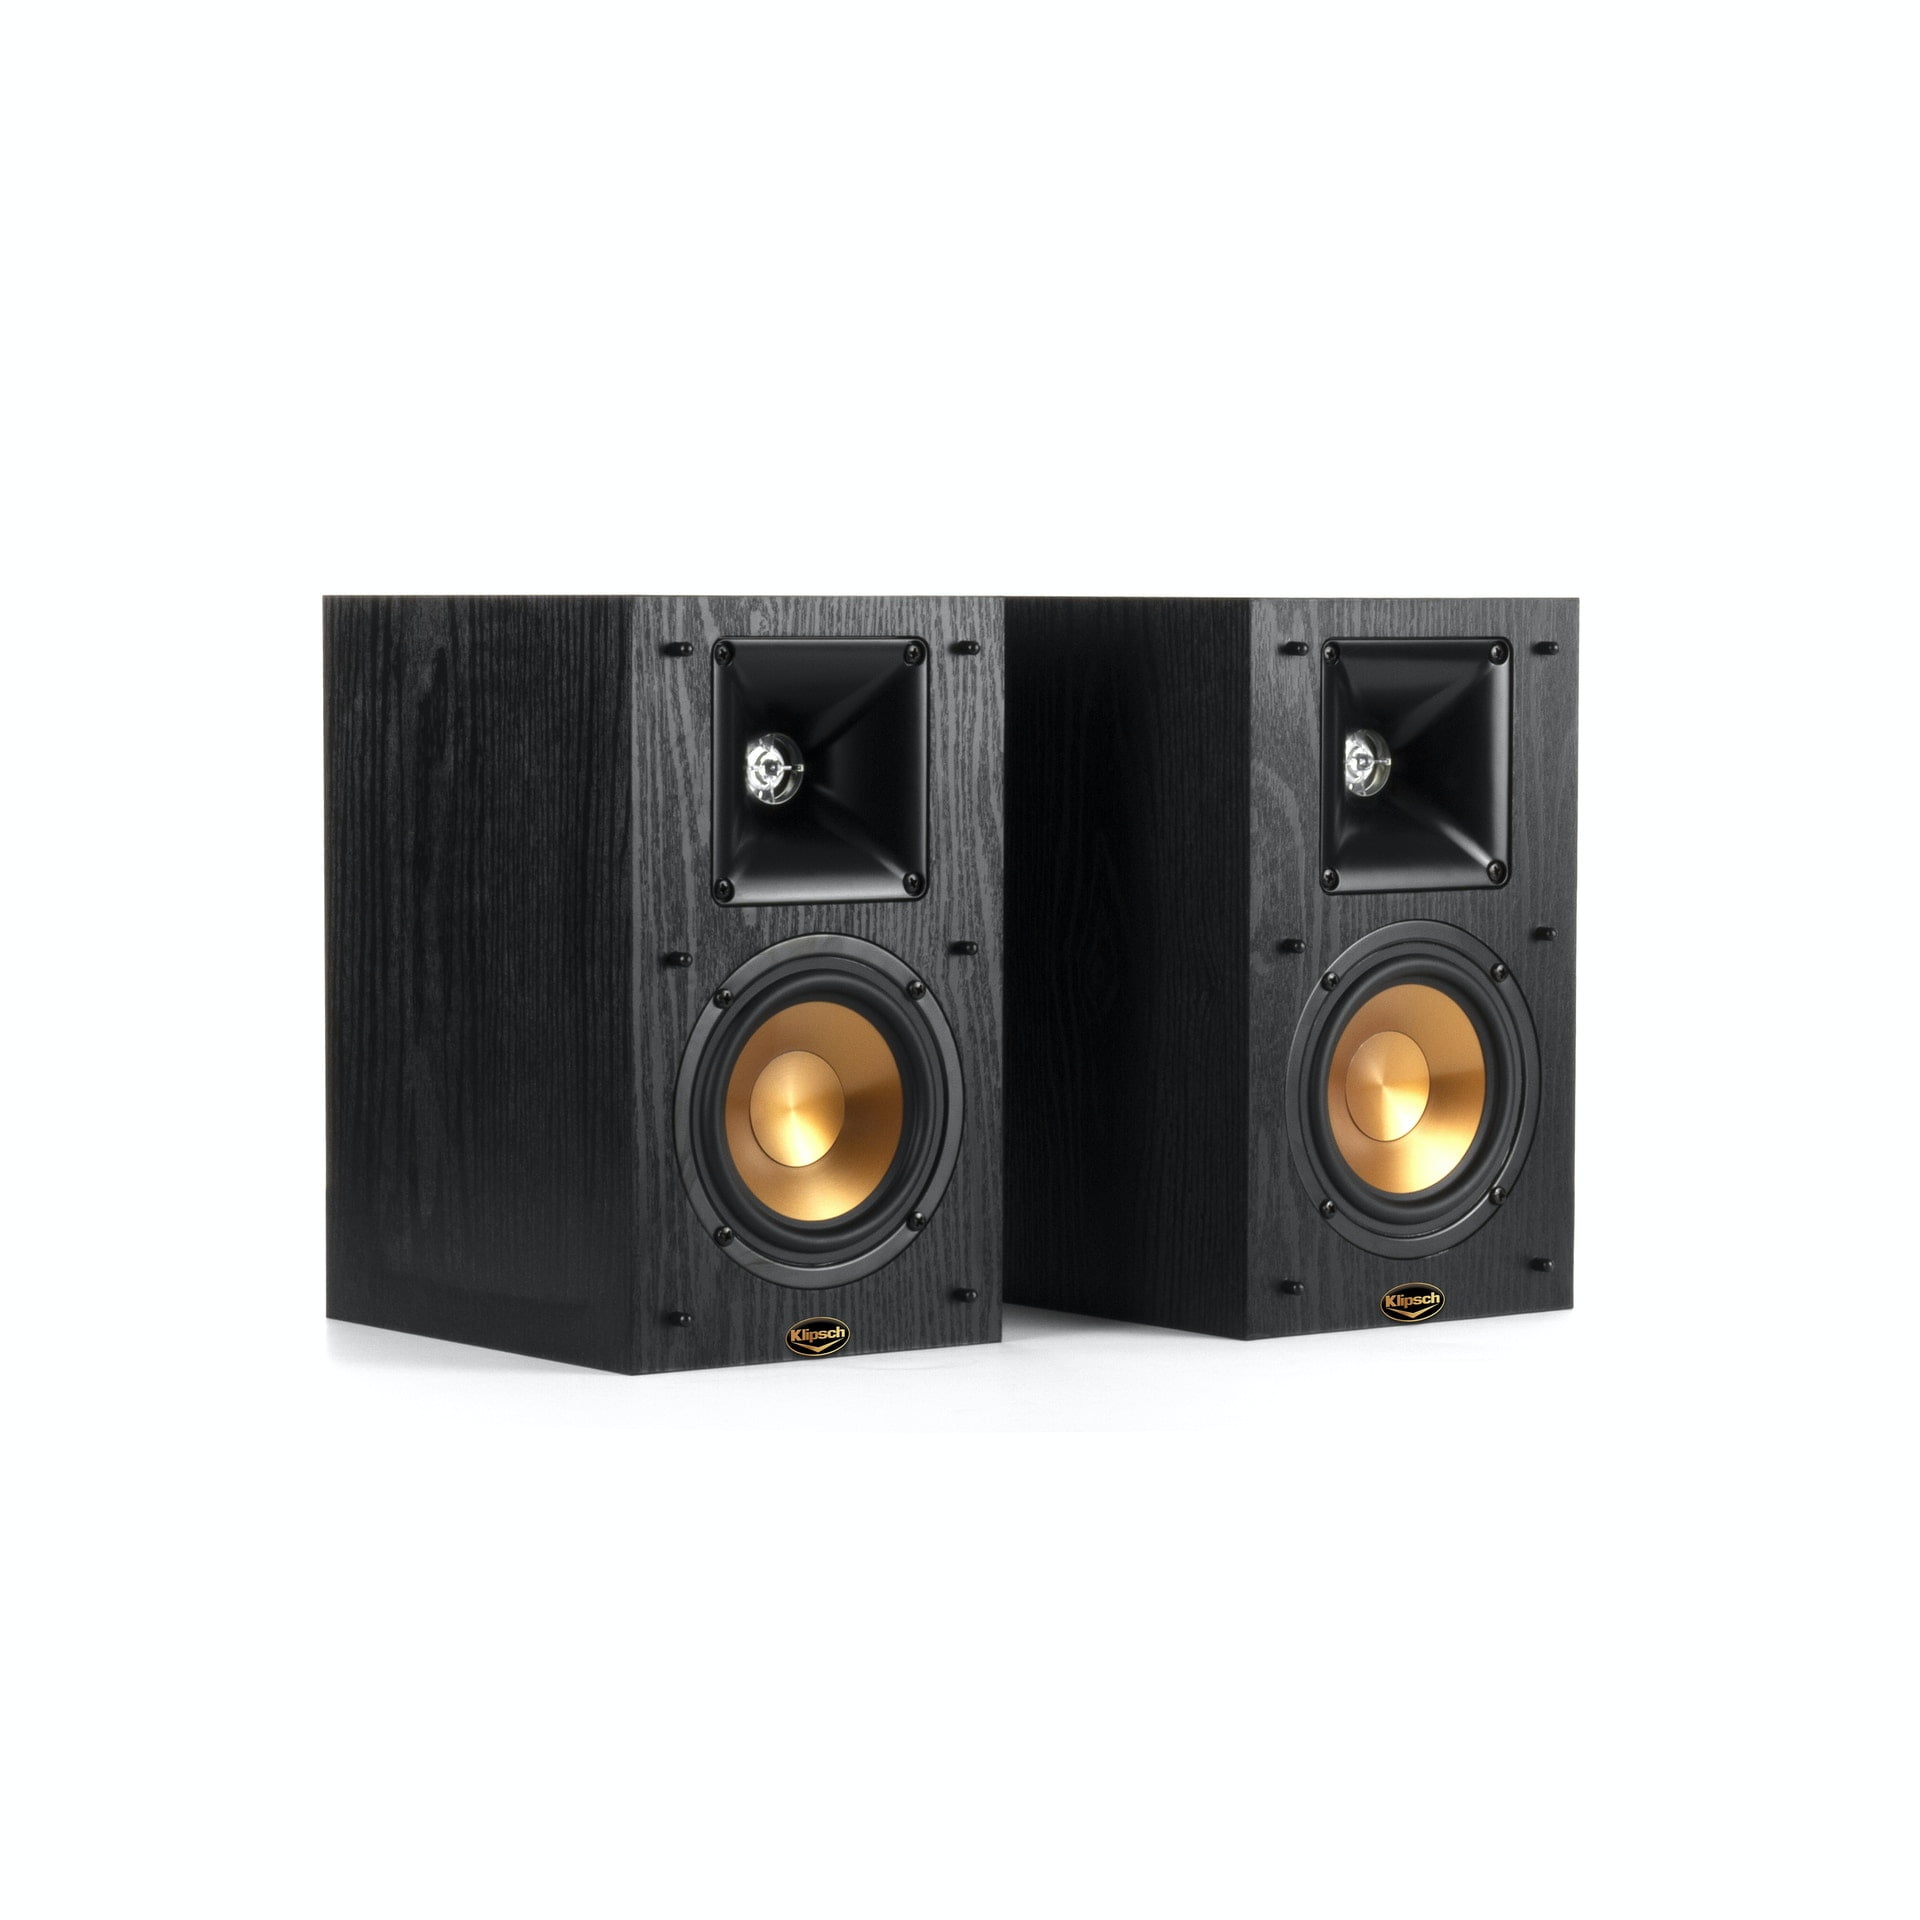 Klipsch Synergy Black Label B-200 Bookshelf Speaker Pair with Proprietary  Horn Technology, a 5.25” High-Output Woofer and a Dynamic .75” Tweeter for  通販